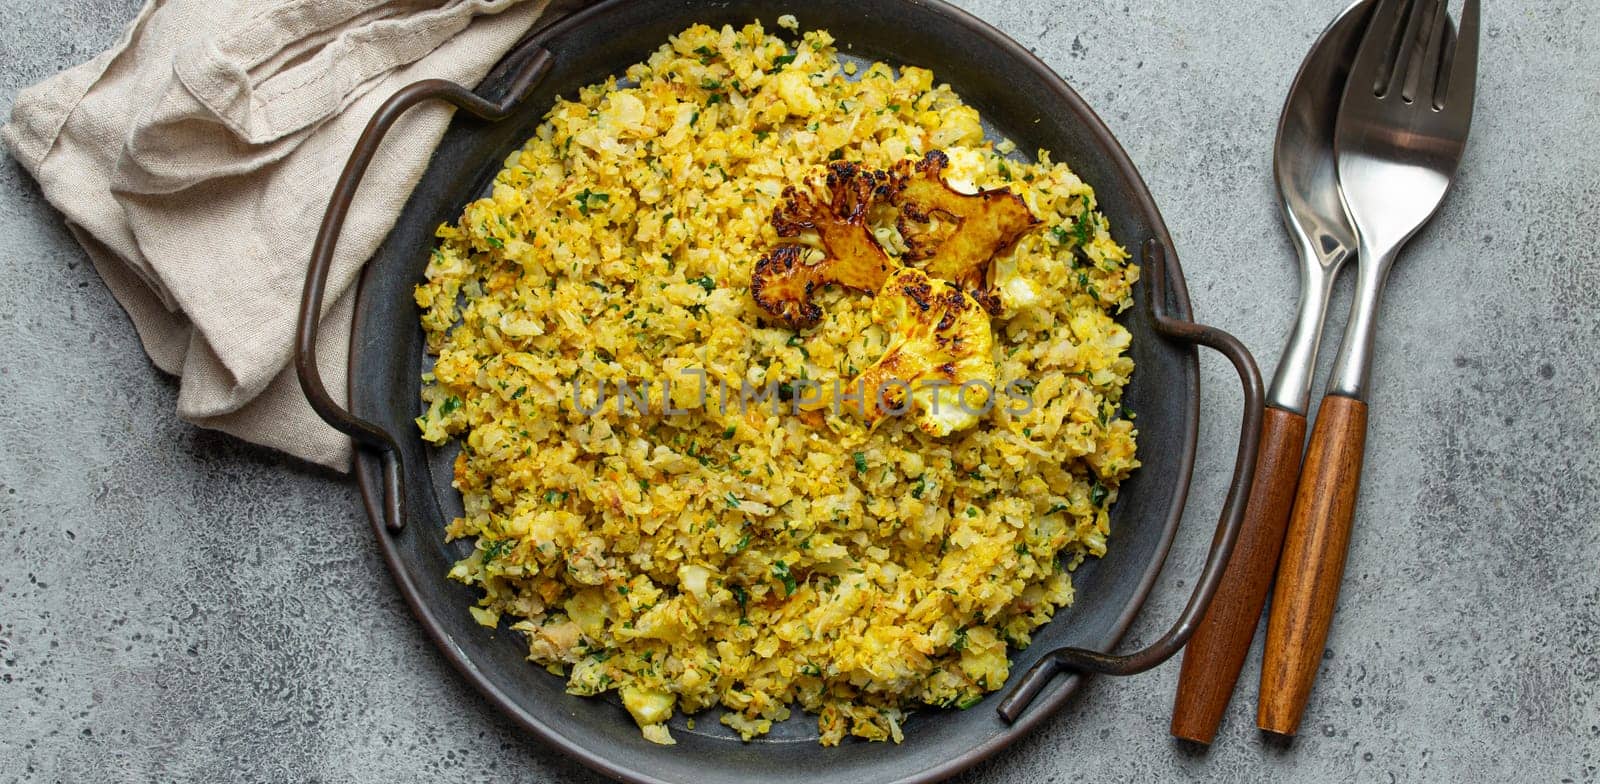 Fried cauliflower rice or couscous with dill on plate, healthy low carbohydrates vegetable side dish for keto diet and healthy low calories nutrition, rustic stone background by its_al_dente